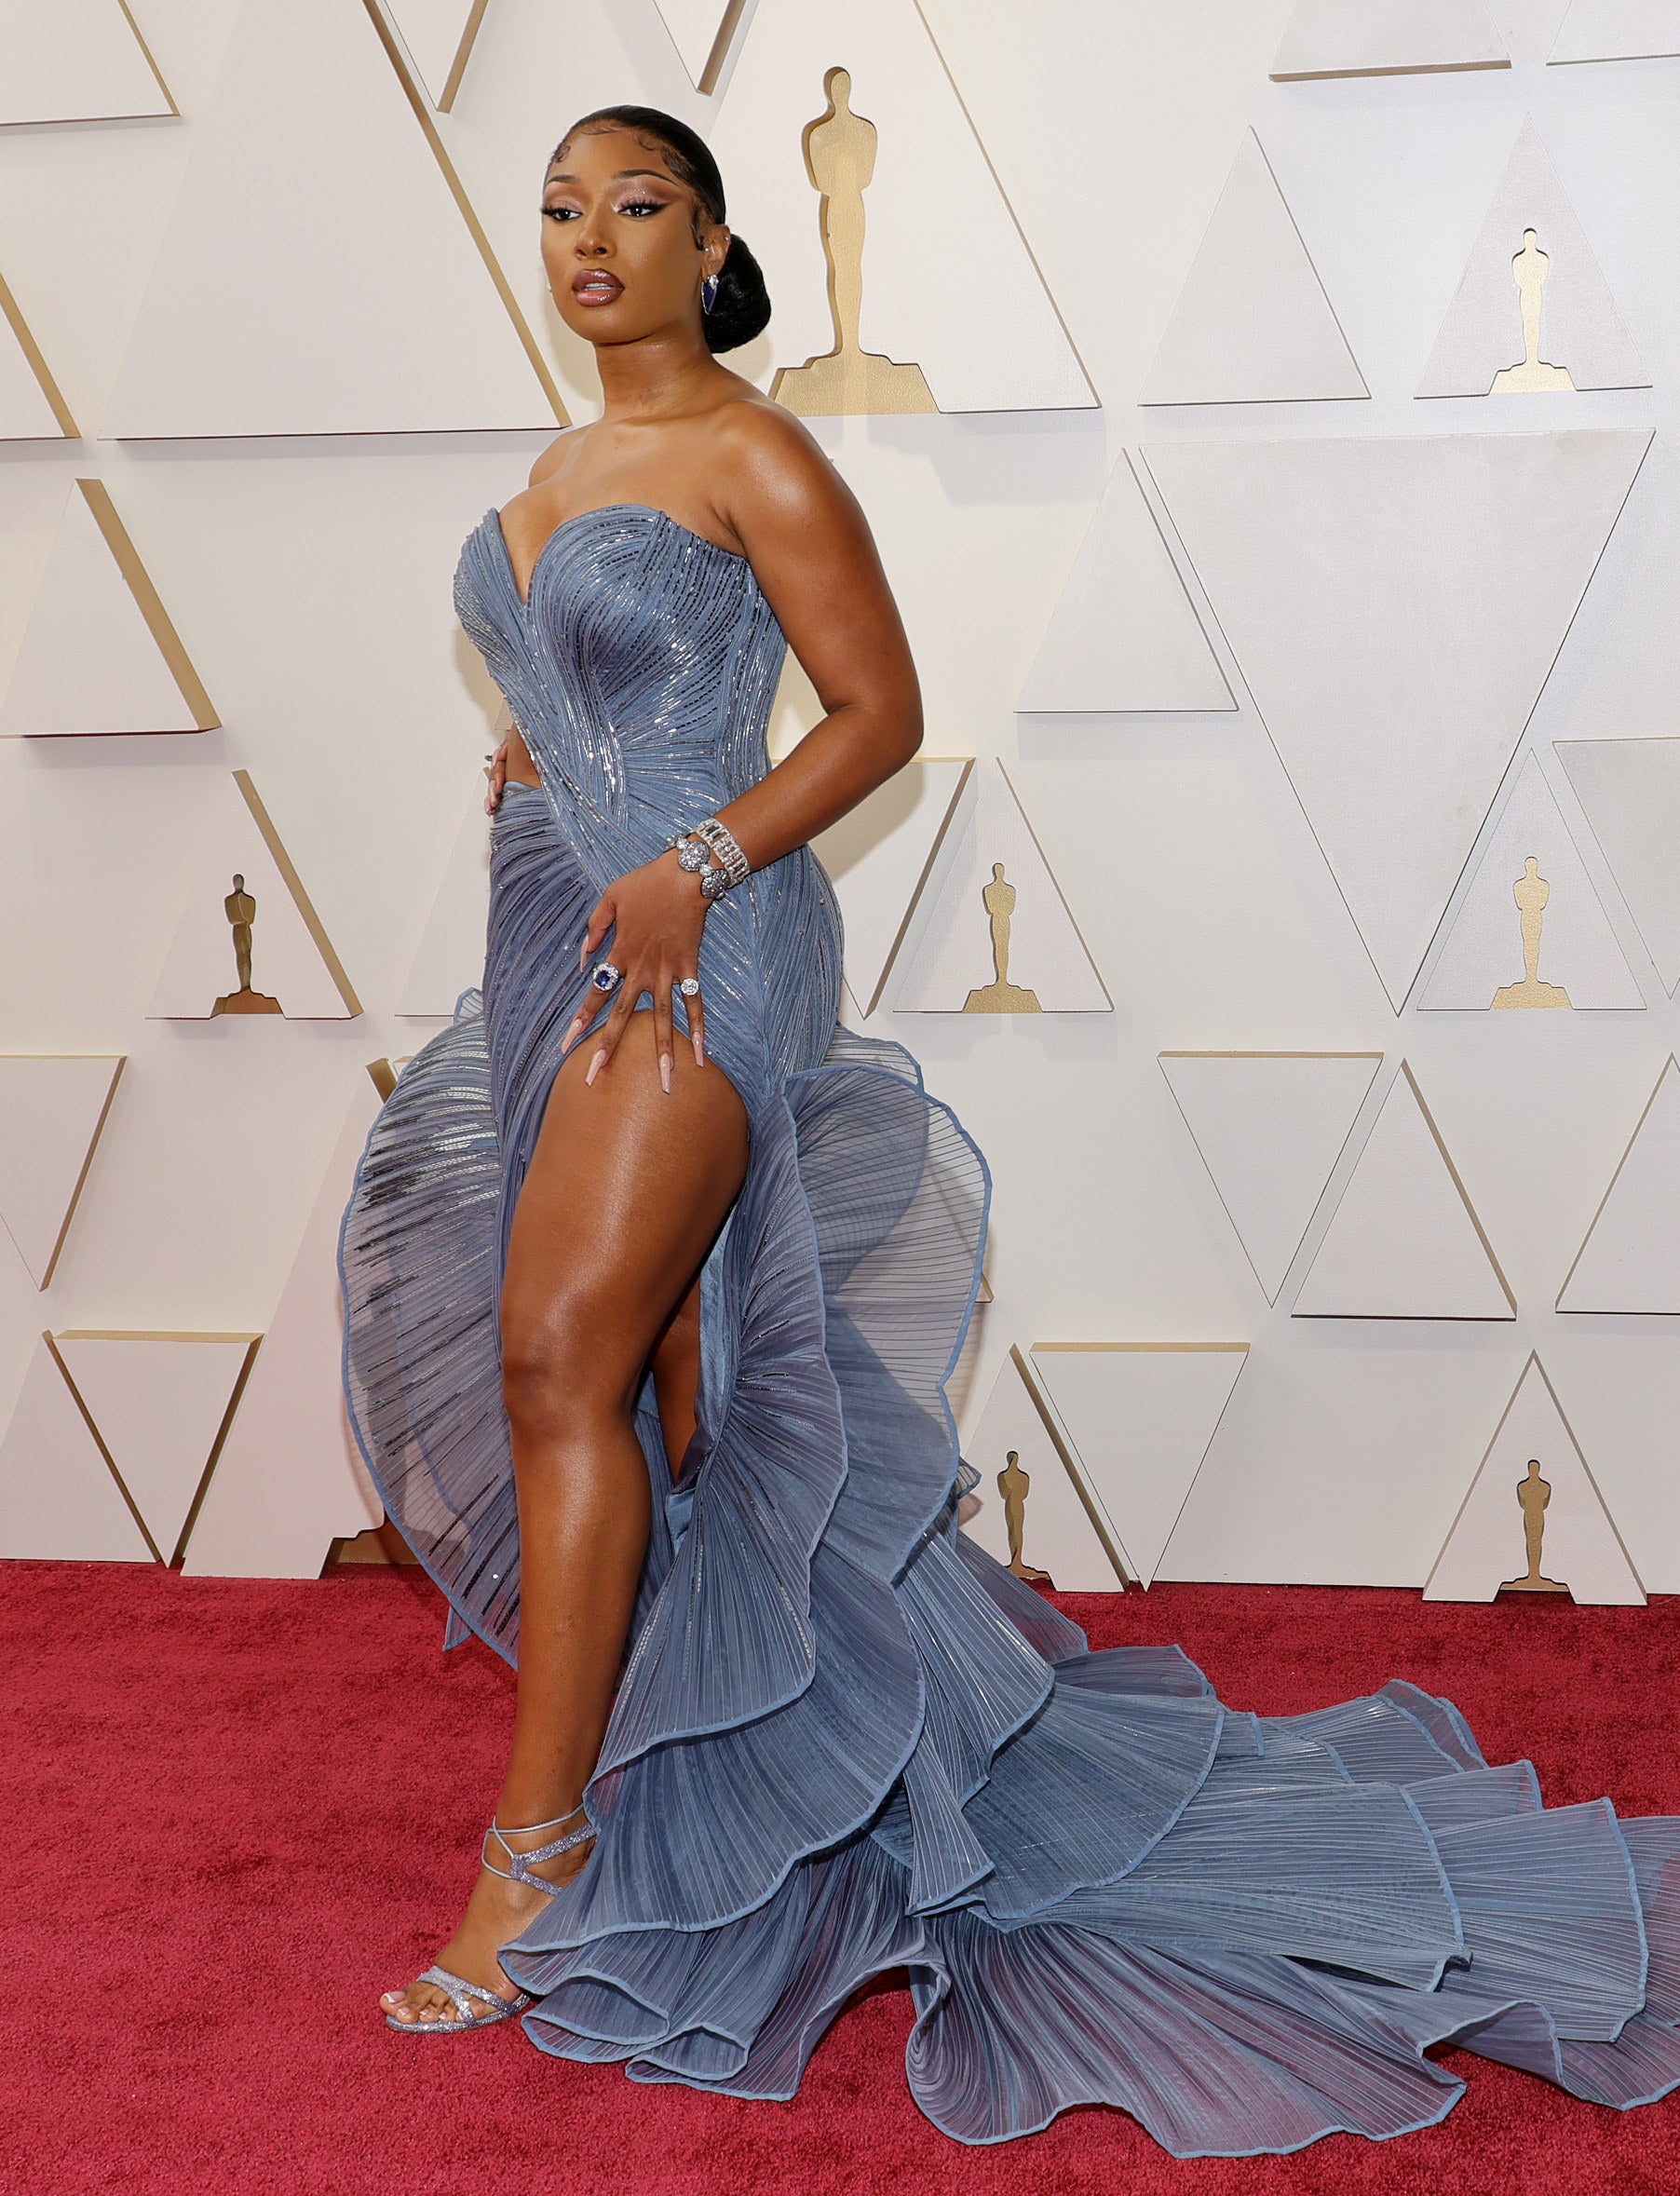 Megan Thee Stallion attends the 94th Annual Academy Awards in a strapless ruffled dress with a sweetheart neckline and a thigh-high slit